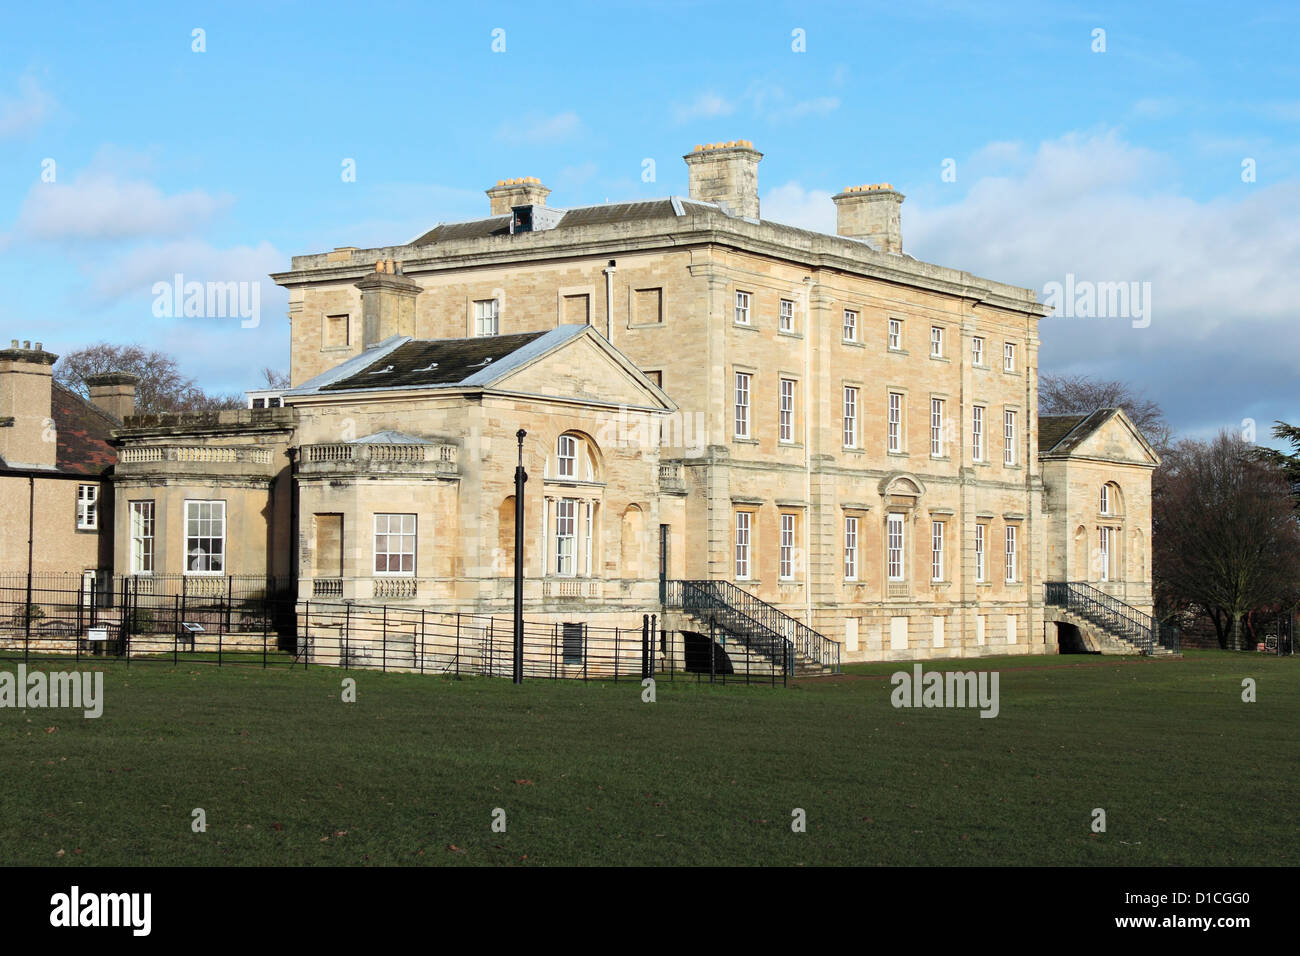 South face of Cusworth Hall, Scawsby, Doncaster.  An 18th century Georgian  country house with a Grade 1 listing.  Now a Museum. Stock Photo